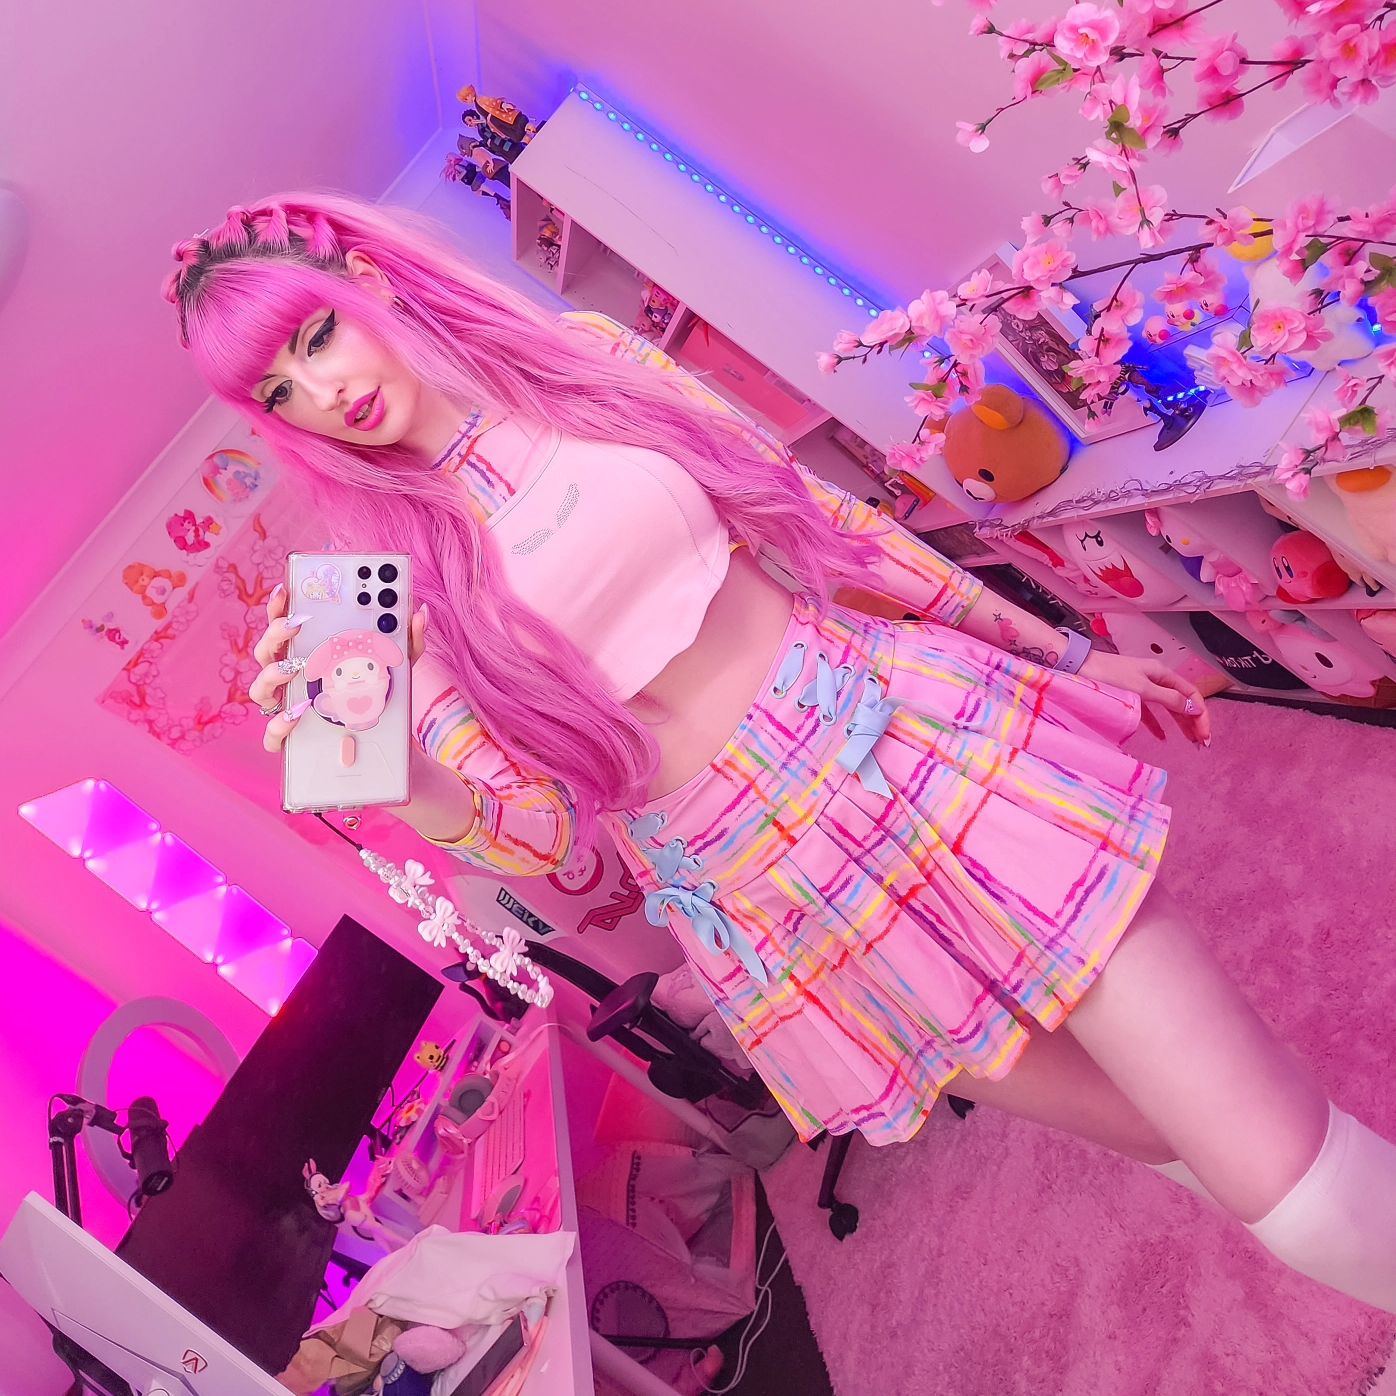 ♡But how much pink is really too much?♡

I am so behind on content! I've been so busy preparing for @dreamhackau and working♥︎
Its all coming together and I am so damn excited! 

Here's a little 90s themed outfit I put together for @jasminfoxe 30th birthday which was a blast!
Group pics to come!🩷

#dangerfield #egirl #altfashion #altgirl #pink #pinkhair #pinkaesthetic